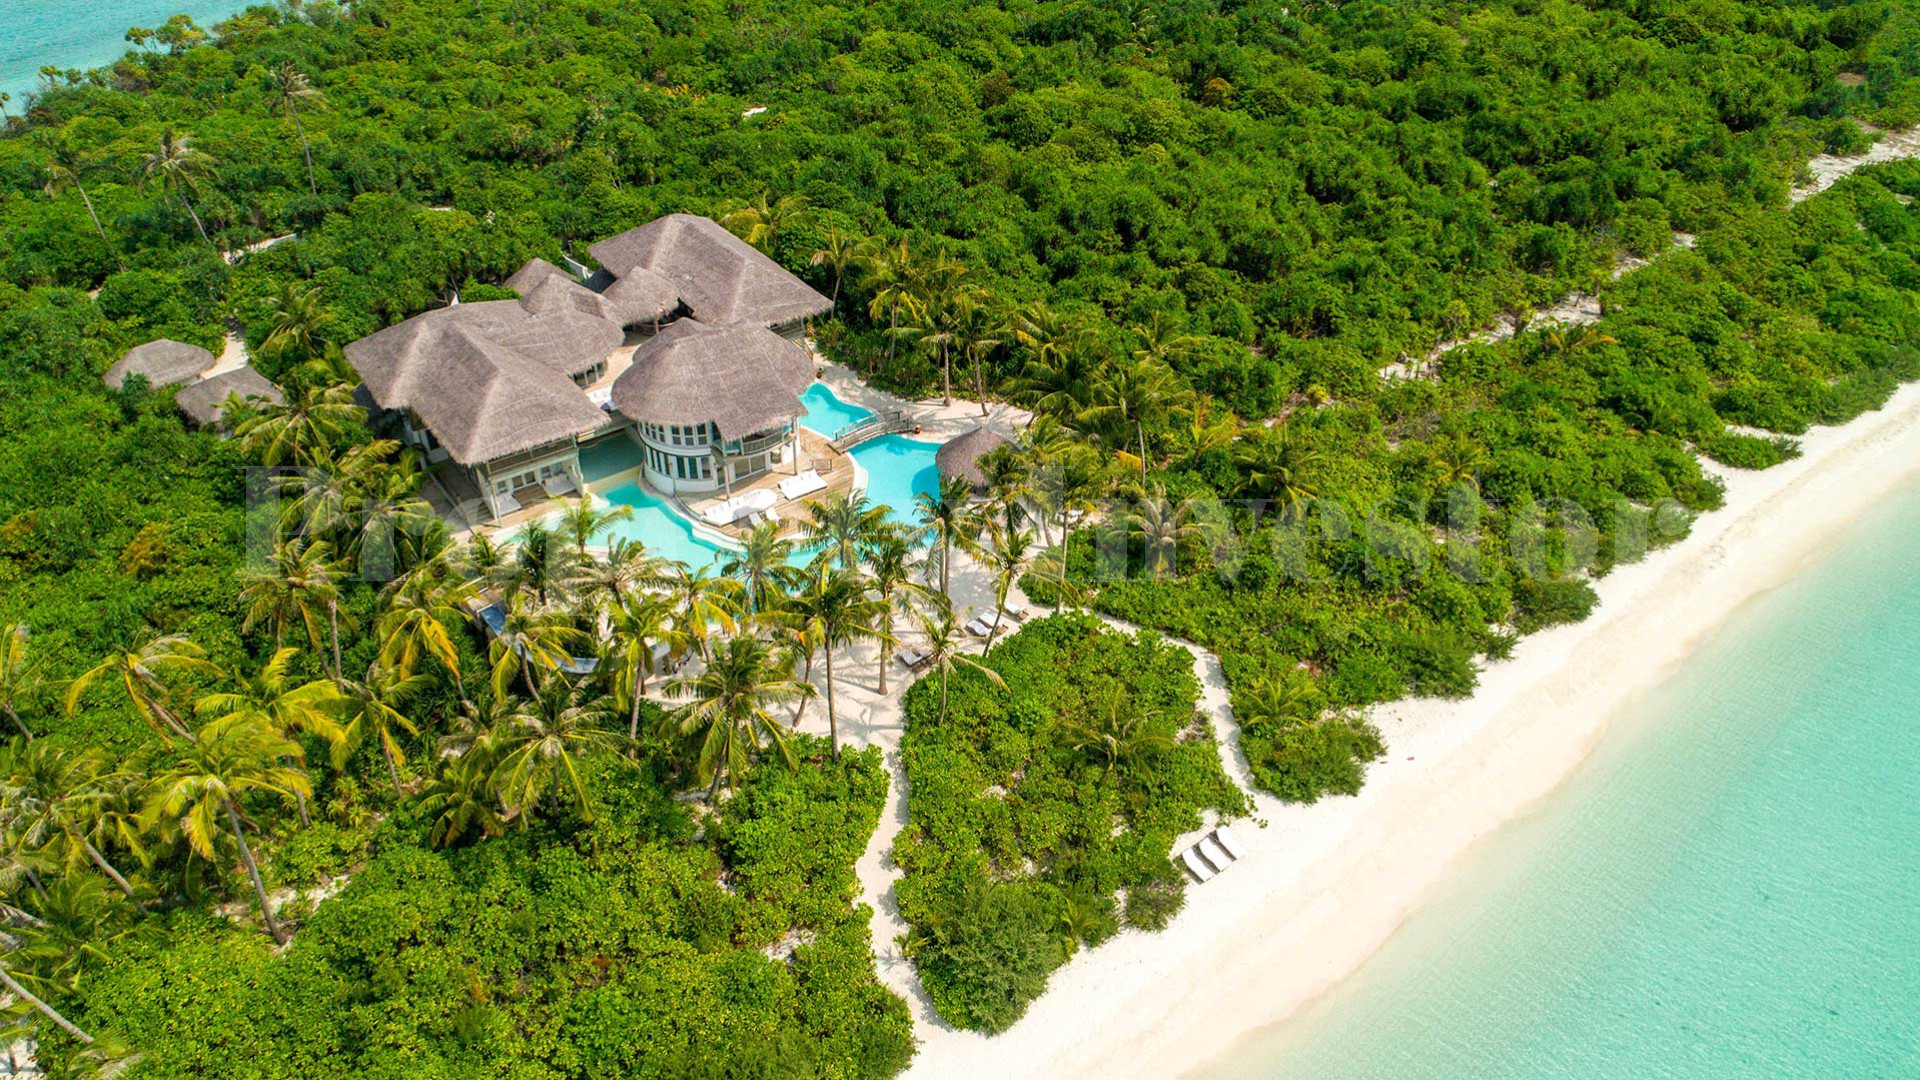 Exclusive 4 Bedroom Private Island Eco Resort Beach Residence with Slide for Sale in the Maldives